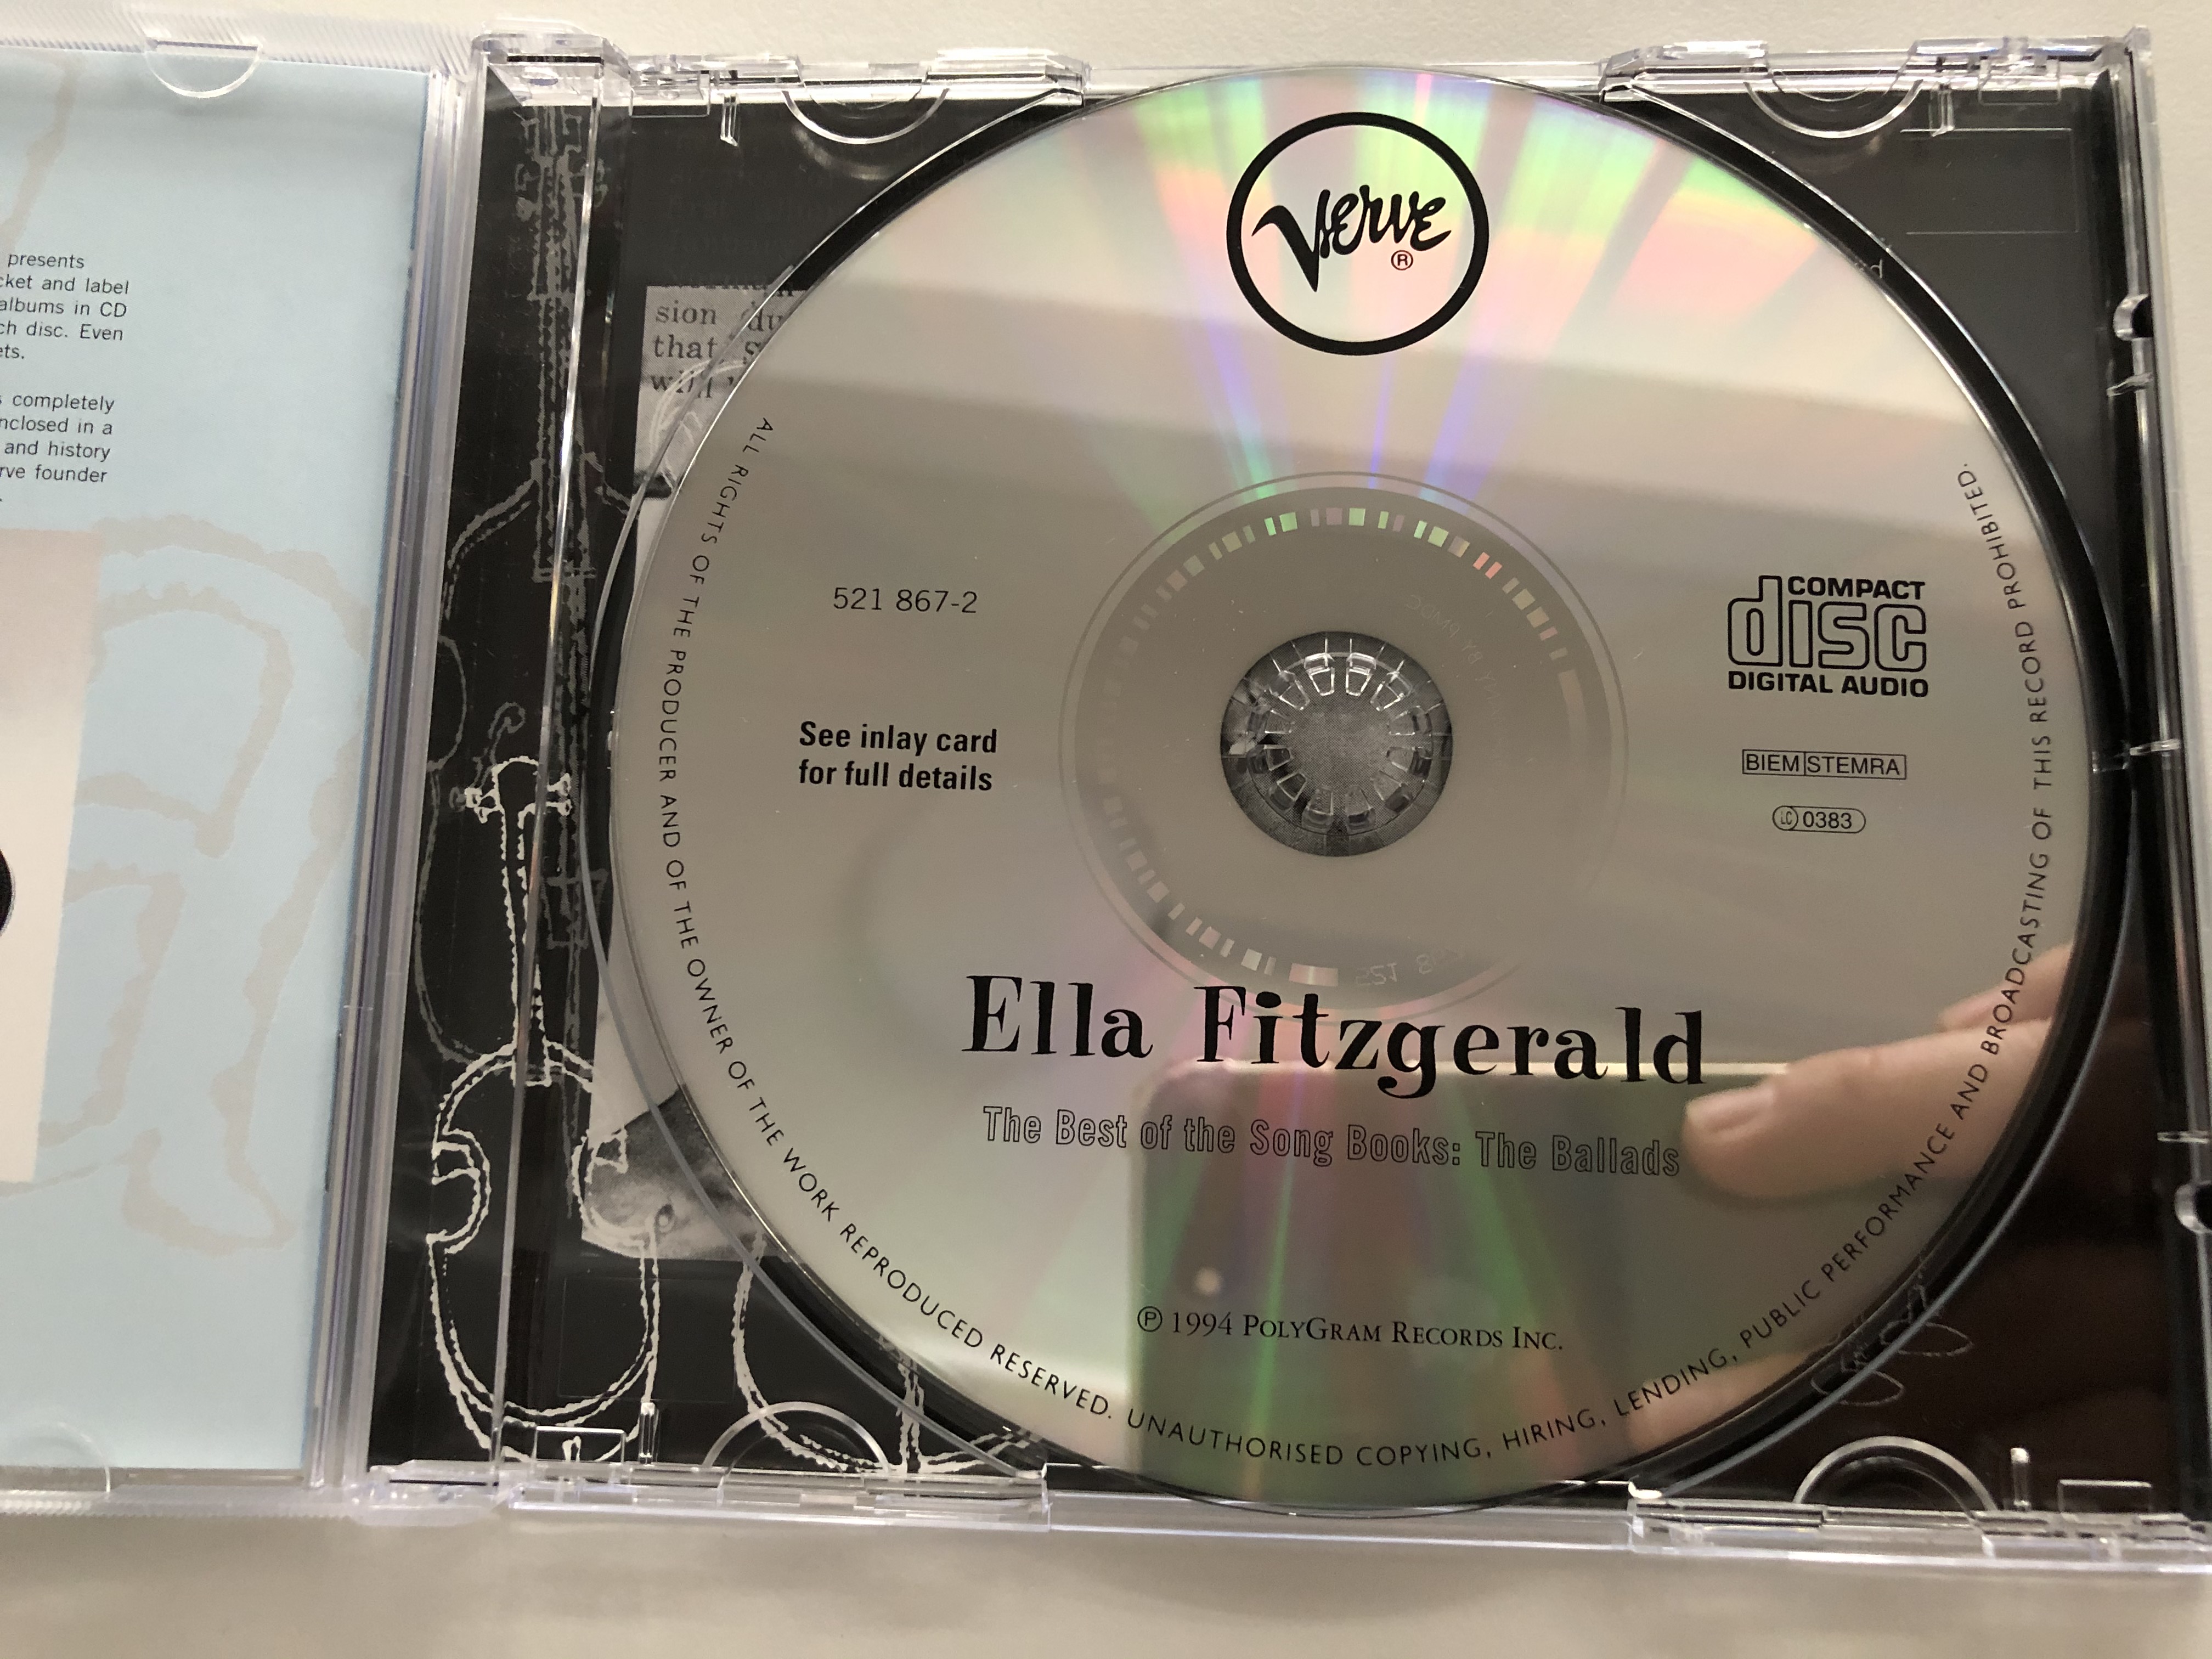 ella-fitzgerald-the-best-of-the-song-books-the-ballads-verve-records-audio-cd-1994-521-867-2-2-.jpg